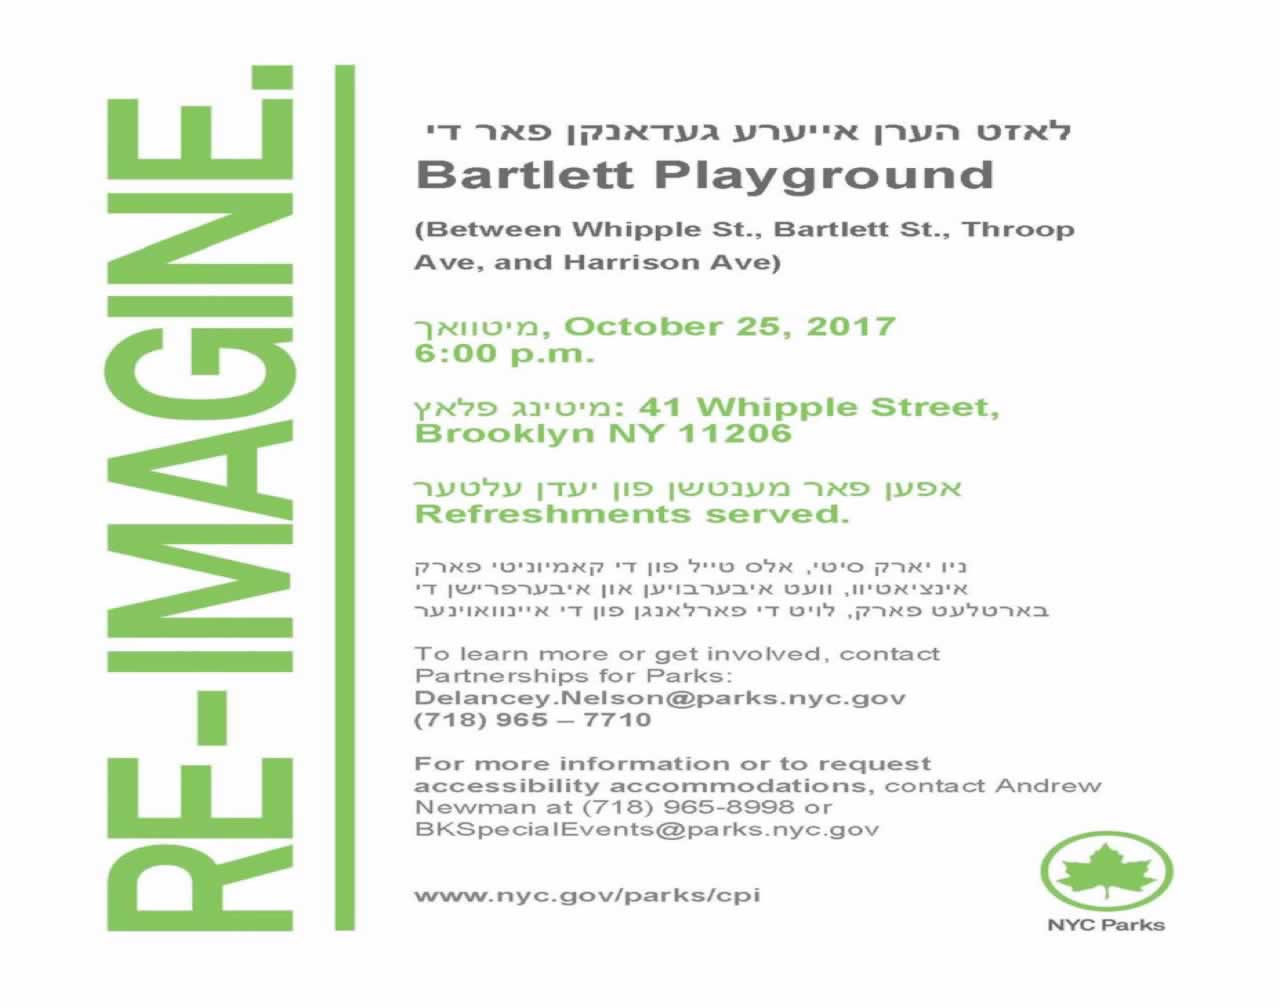 UJO worked with the NYC Parks Department to reimagine old and crumbling parks for the Bartlett Playground and Penn Triangle